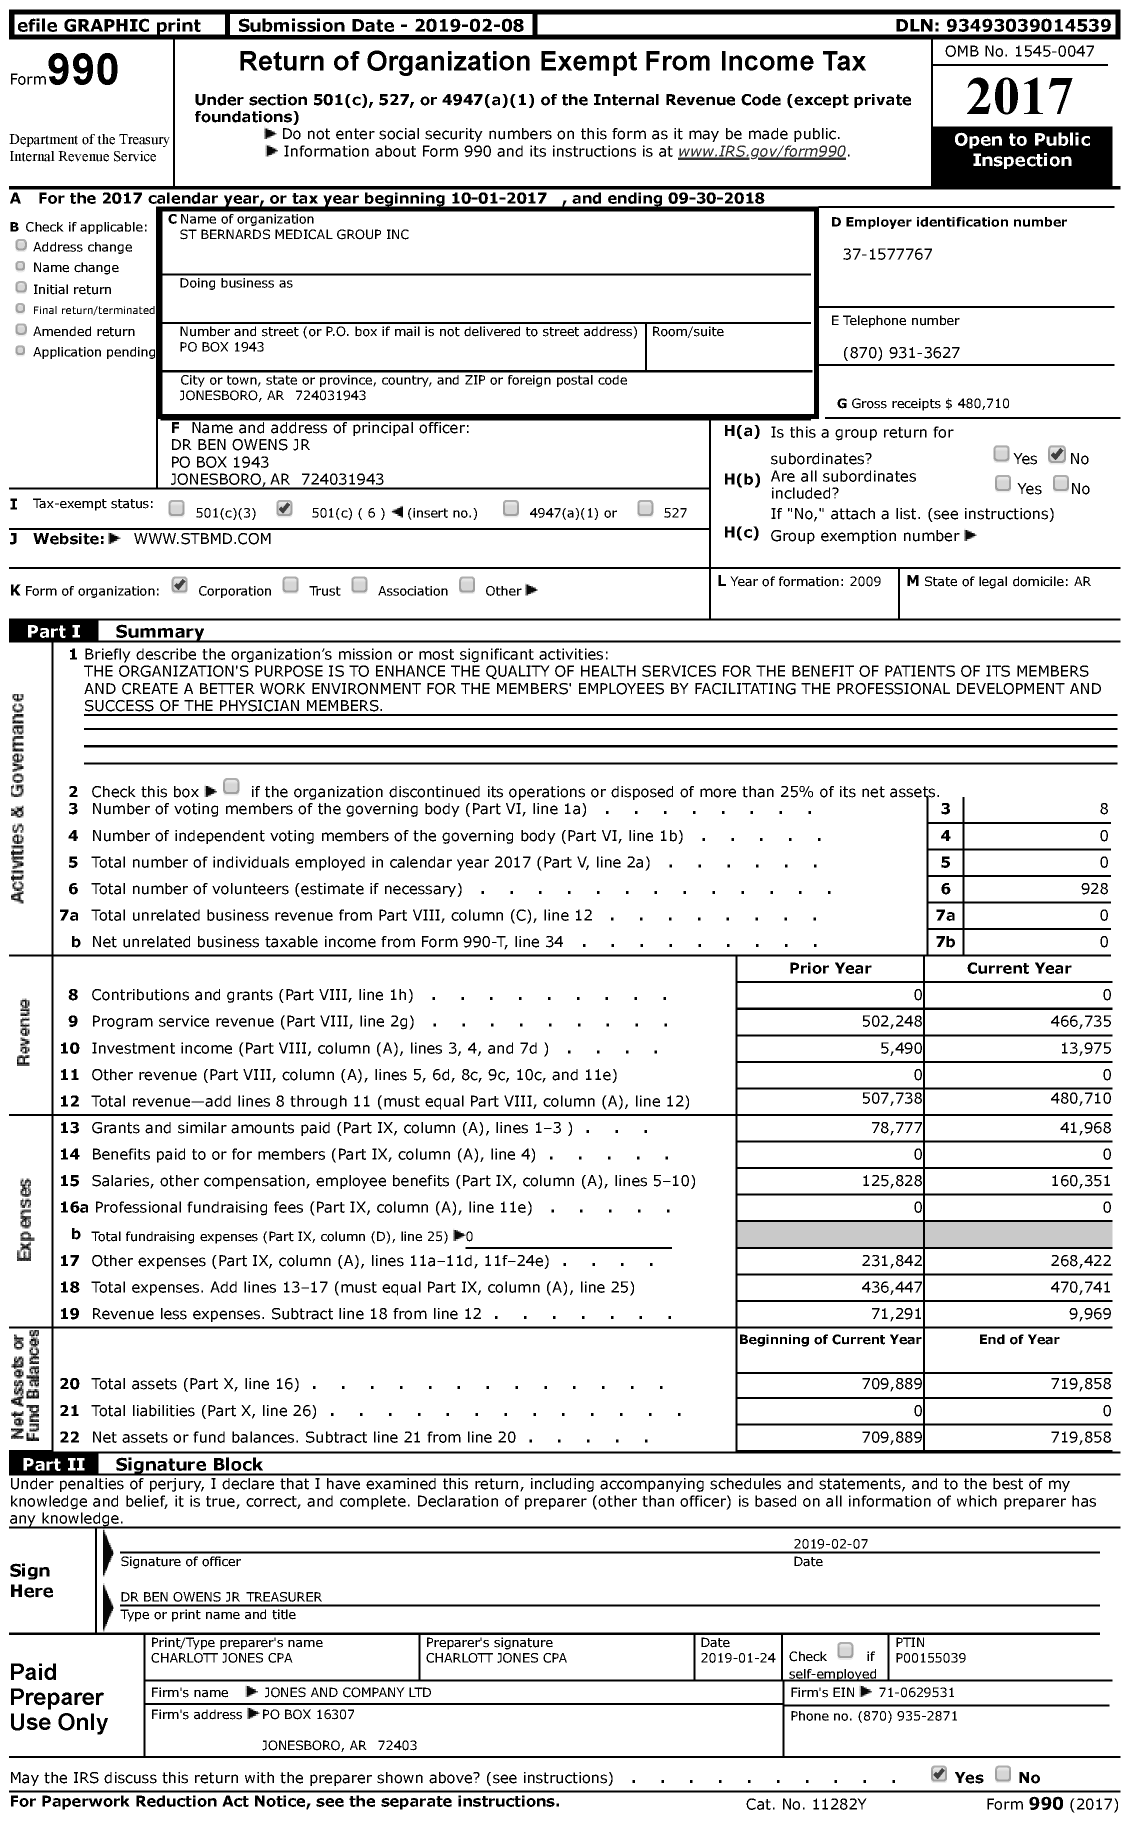 Image of first page of 2017 Form 990 for Healthcare Medical Group (HMG)